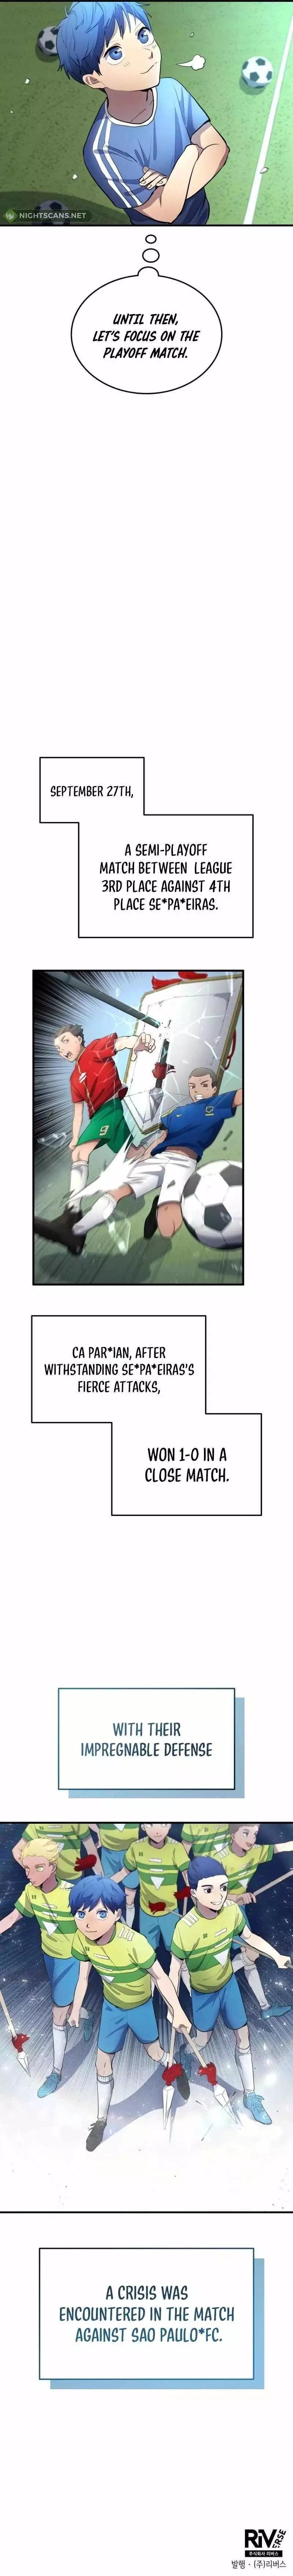 All Soccer Talents Are Mine - 34 page 15-4deefe14